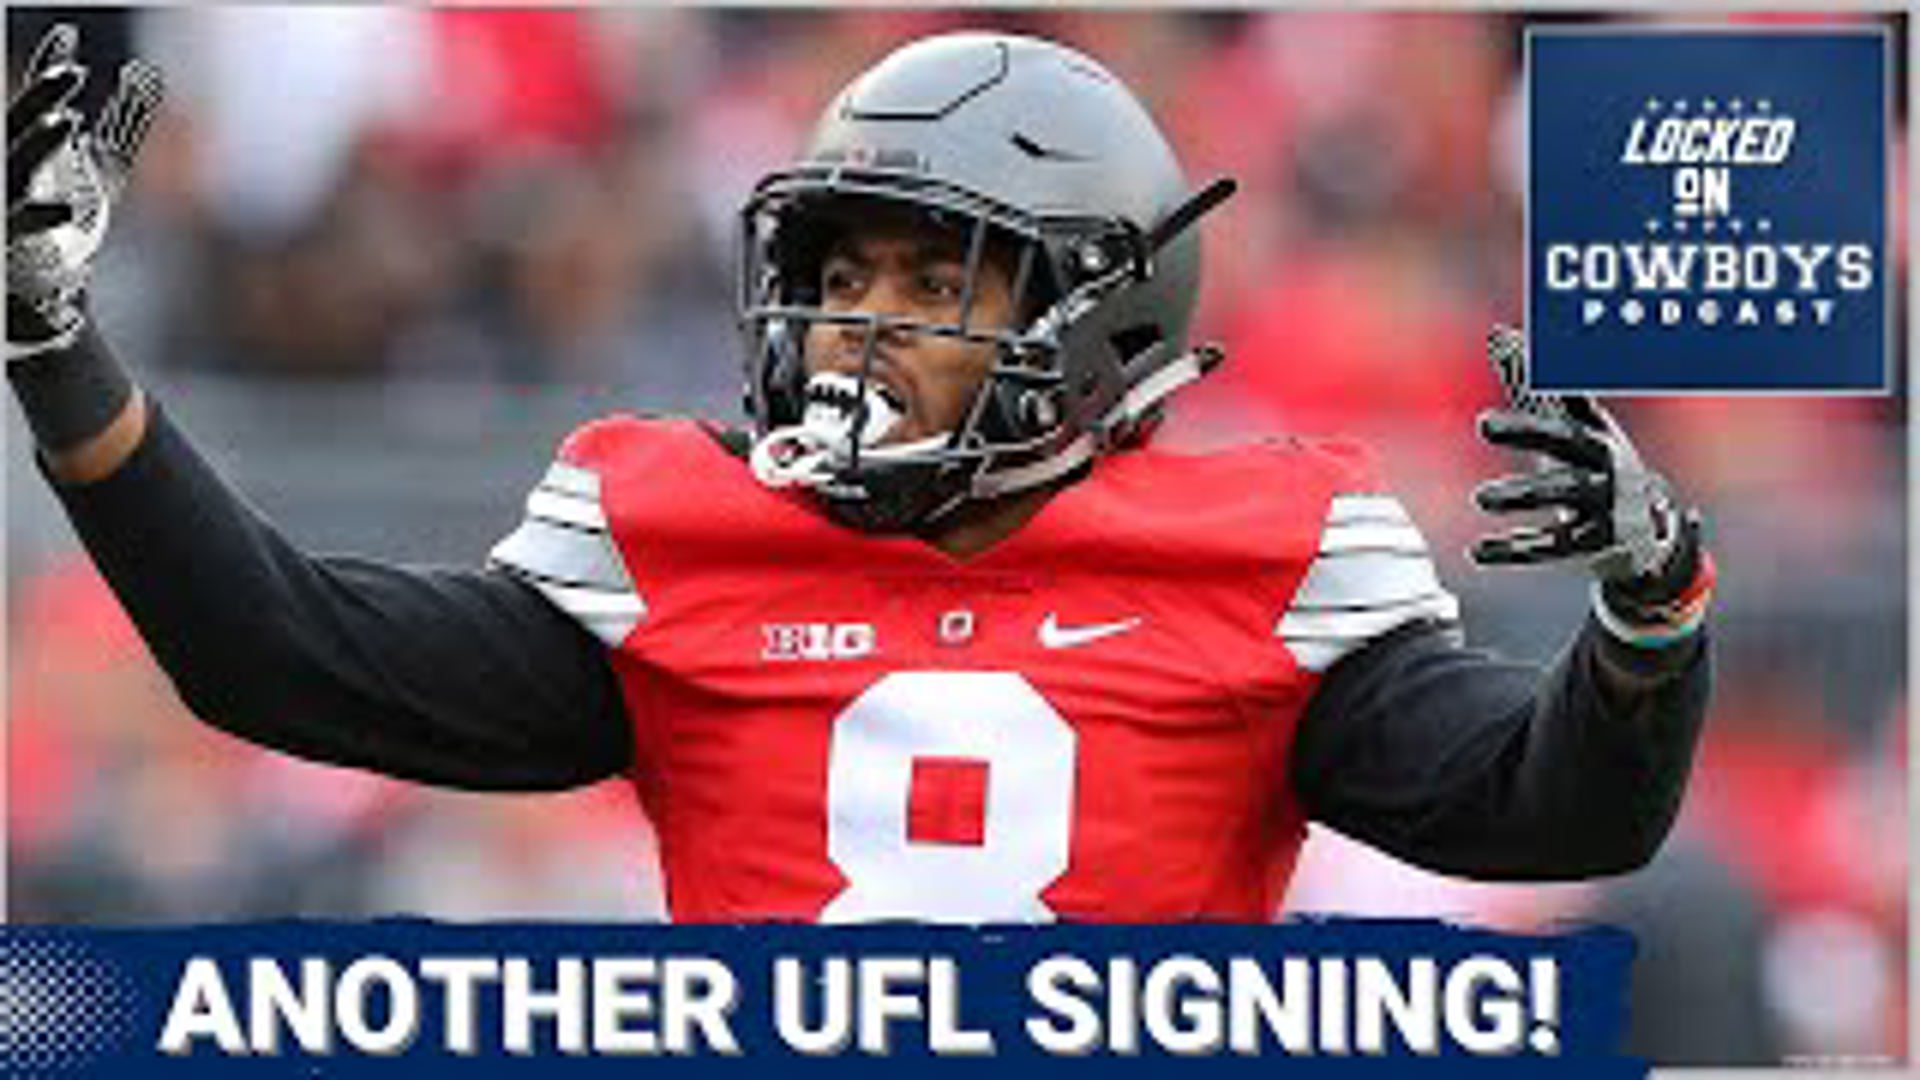 The Dallas Cowboys announced on Tuesday that they have signed former first-round pick Gareon Conley to a one-year deal following a successful UFL season.